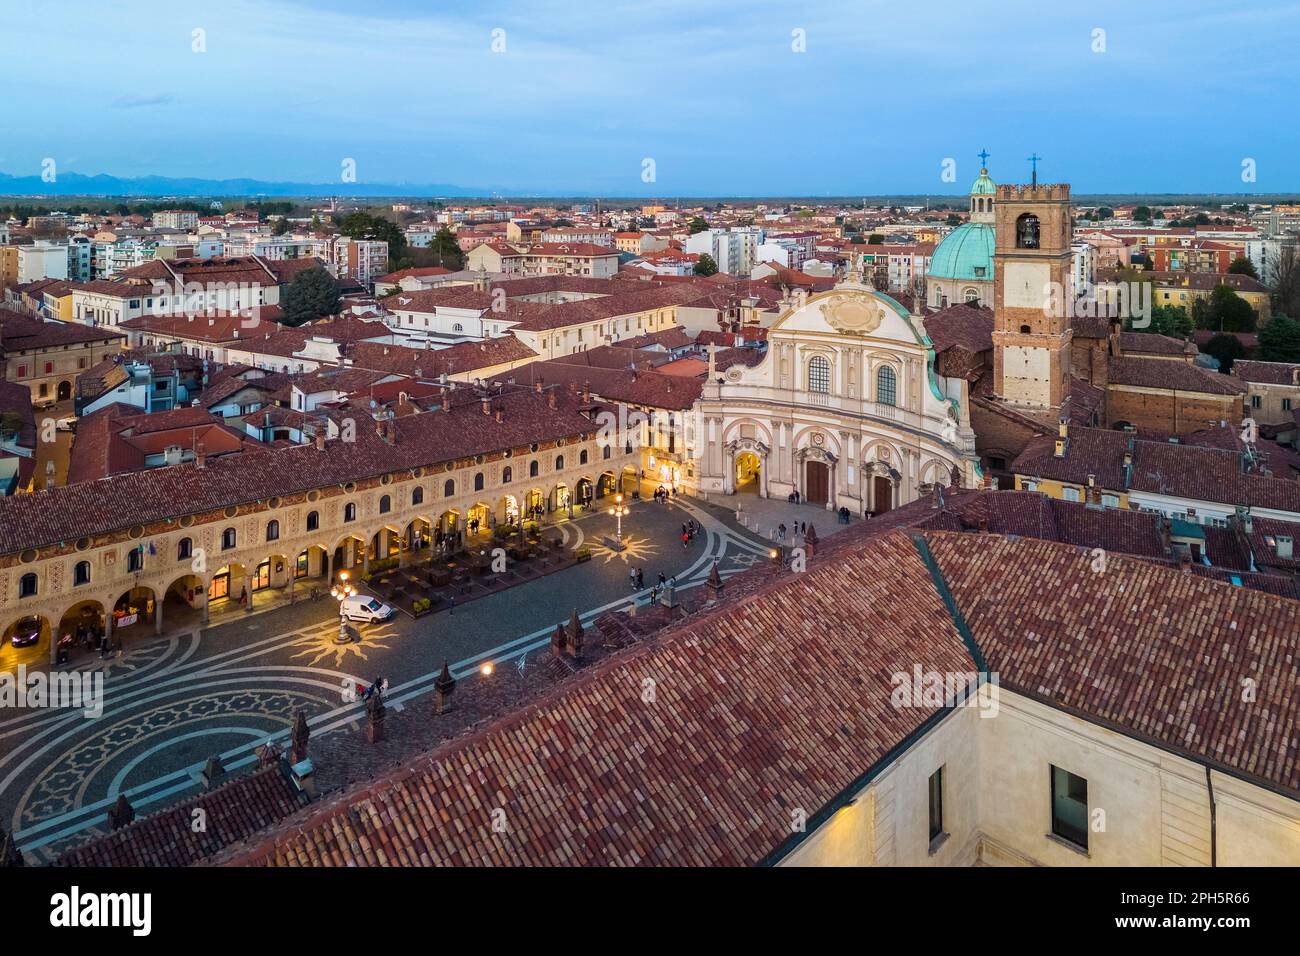 Aerial view of the Pizza Ducale square and Sant'Ambrogio cathedral in city center of Vigevano. Vigevano, Pavia district, Lomellina, Lombardy, Italy. Stock Photo